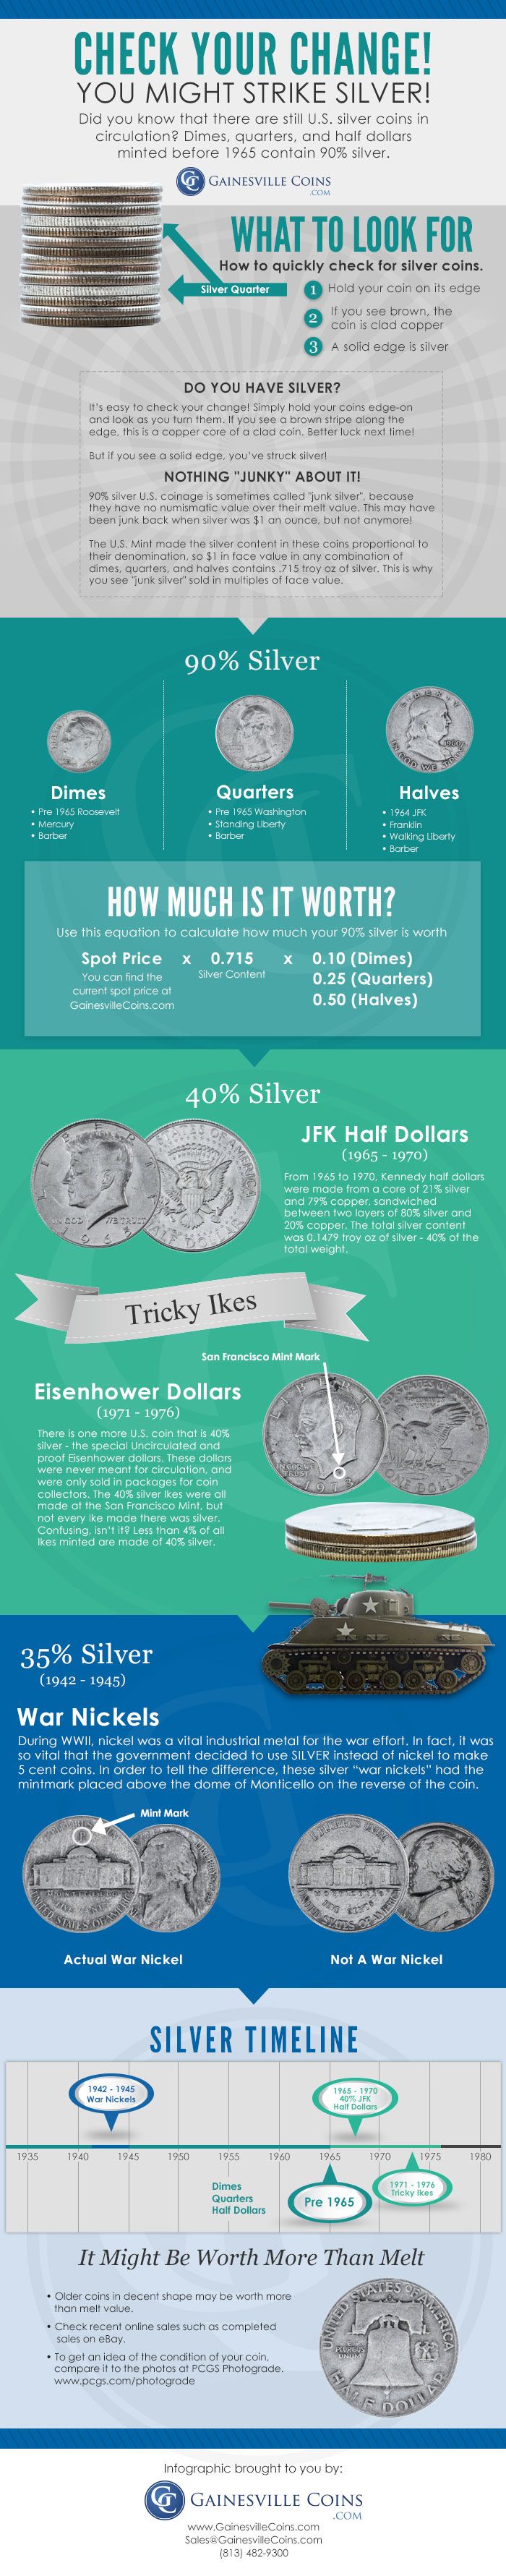 InfoGraphic: Check Your Change: You Might Strike Silver